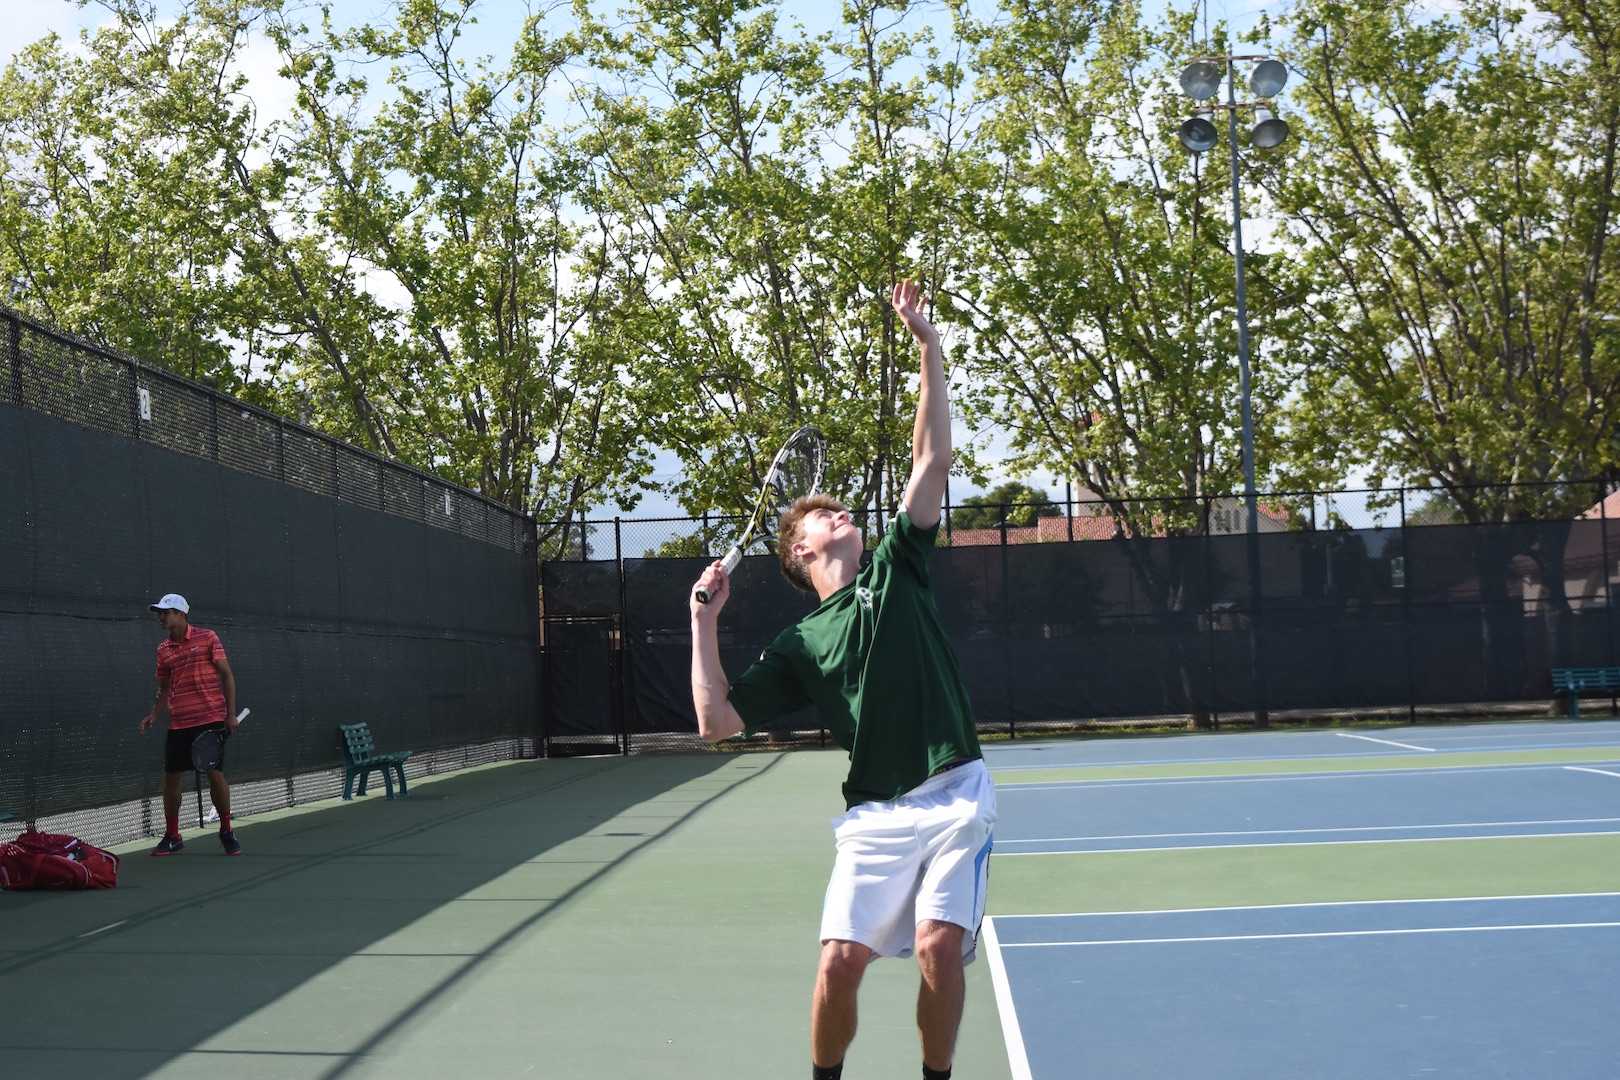 Senior Adrian Tompert serves a ball to his opponent.